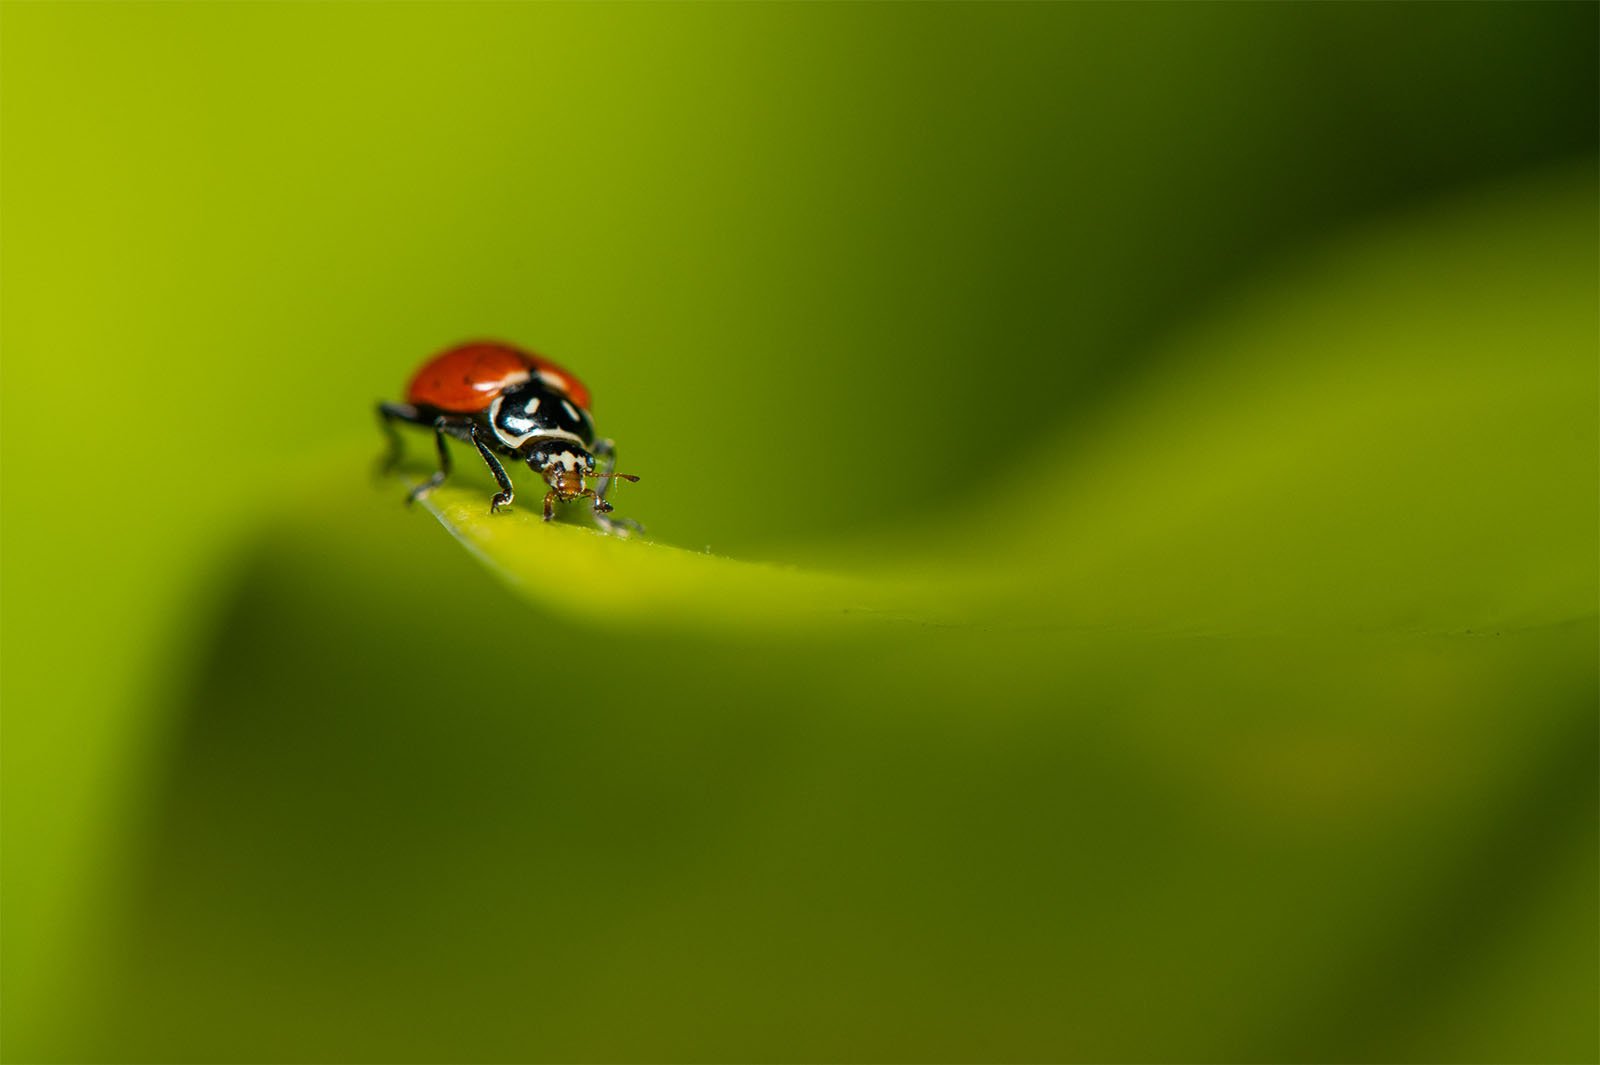 A ladybug at the edge of a vibrant green leaf, with a soft-focus green background, highlighting the bright red and black pattern of the ladybug.